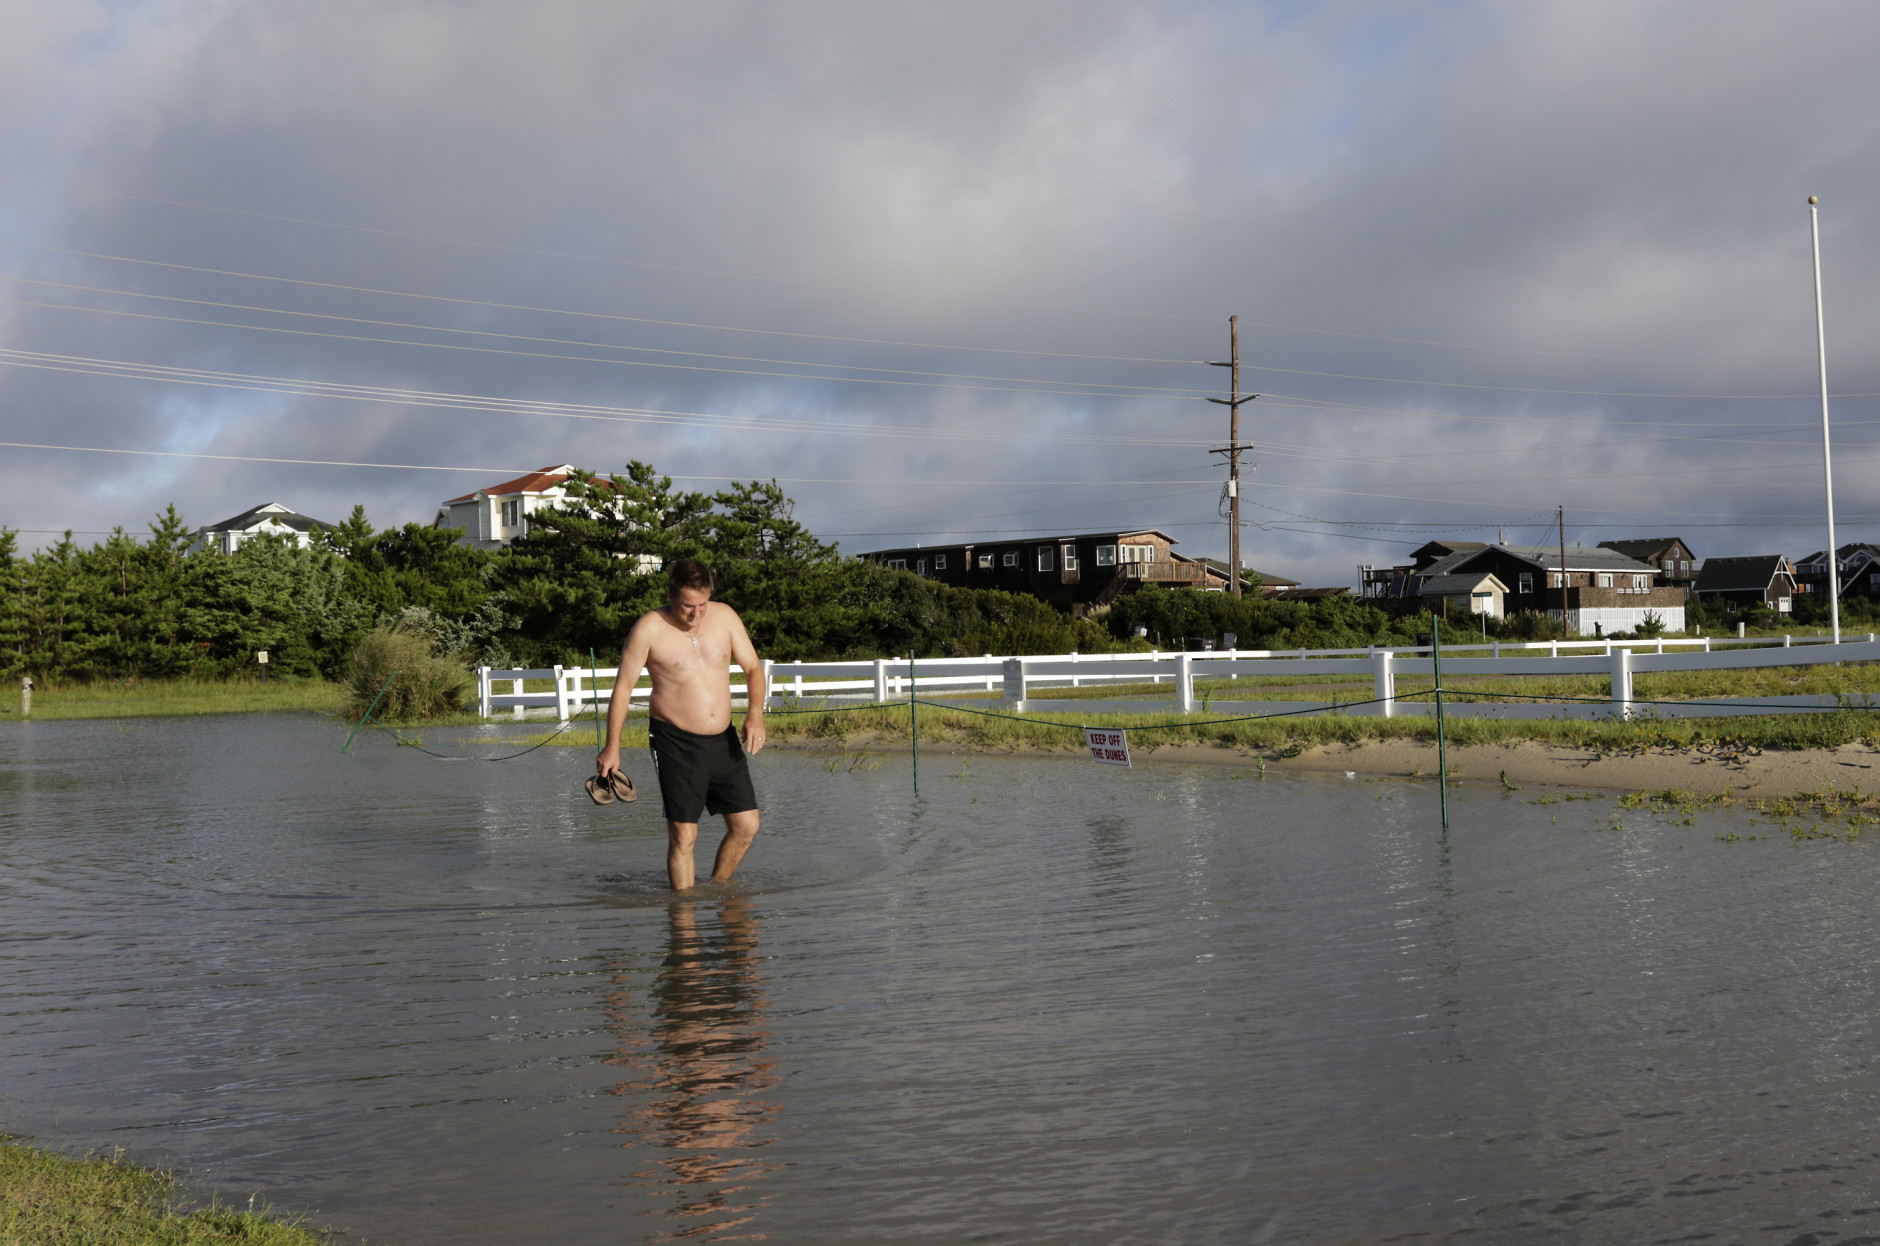 Paul O'Brien of Australia checks the depth of the road near the home he rented for vacation in Rodanthe, N.C., Saturday, Sept. 3, 2016 after Tropical Storm Hermine passed the Outer Banks.  The storm is expected to dump several inches of rain in parts of coastal Virginia, Maryland, Delaware, New Jersey and New York as the Labor Day weekend continues.  (AP Photo/Tom Copeland)